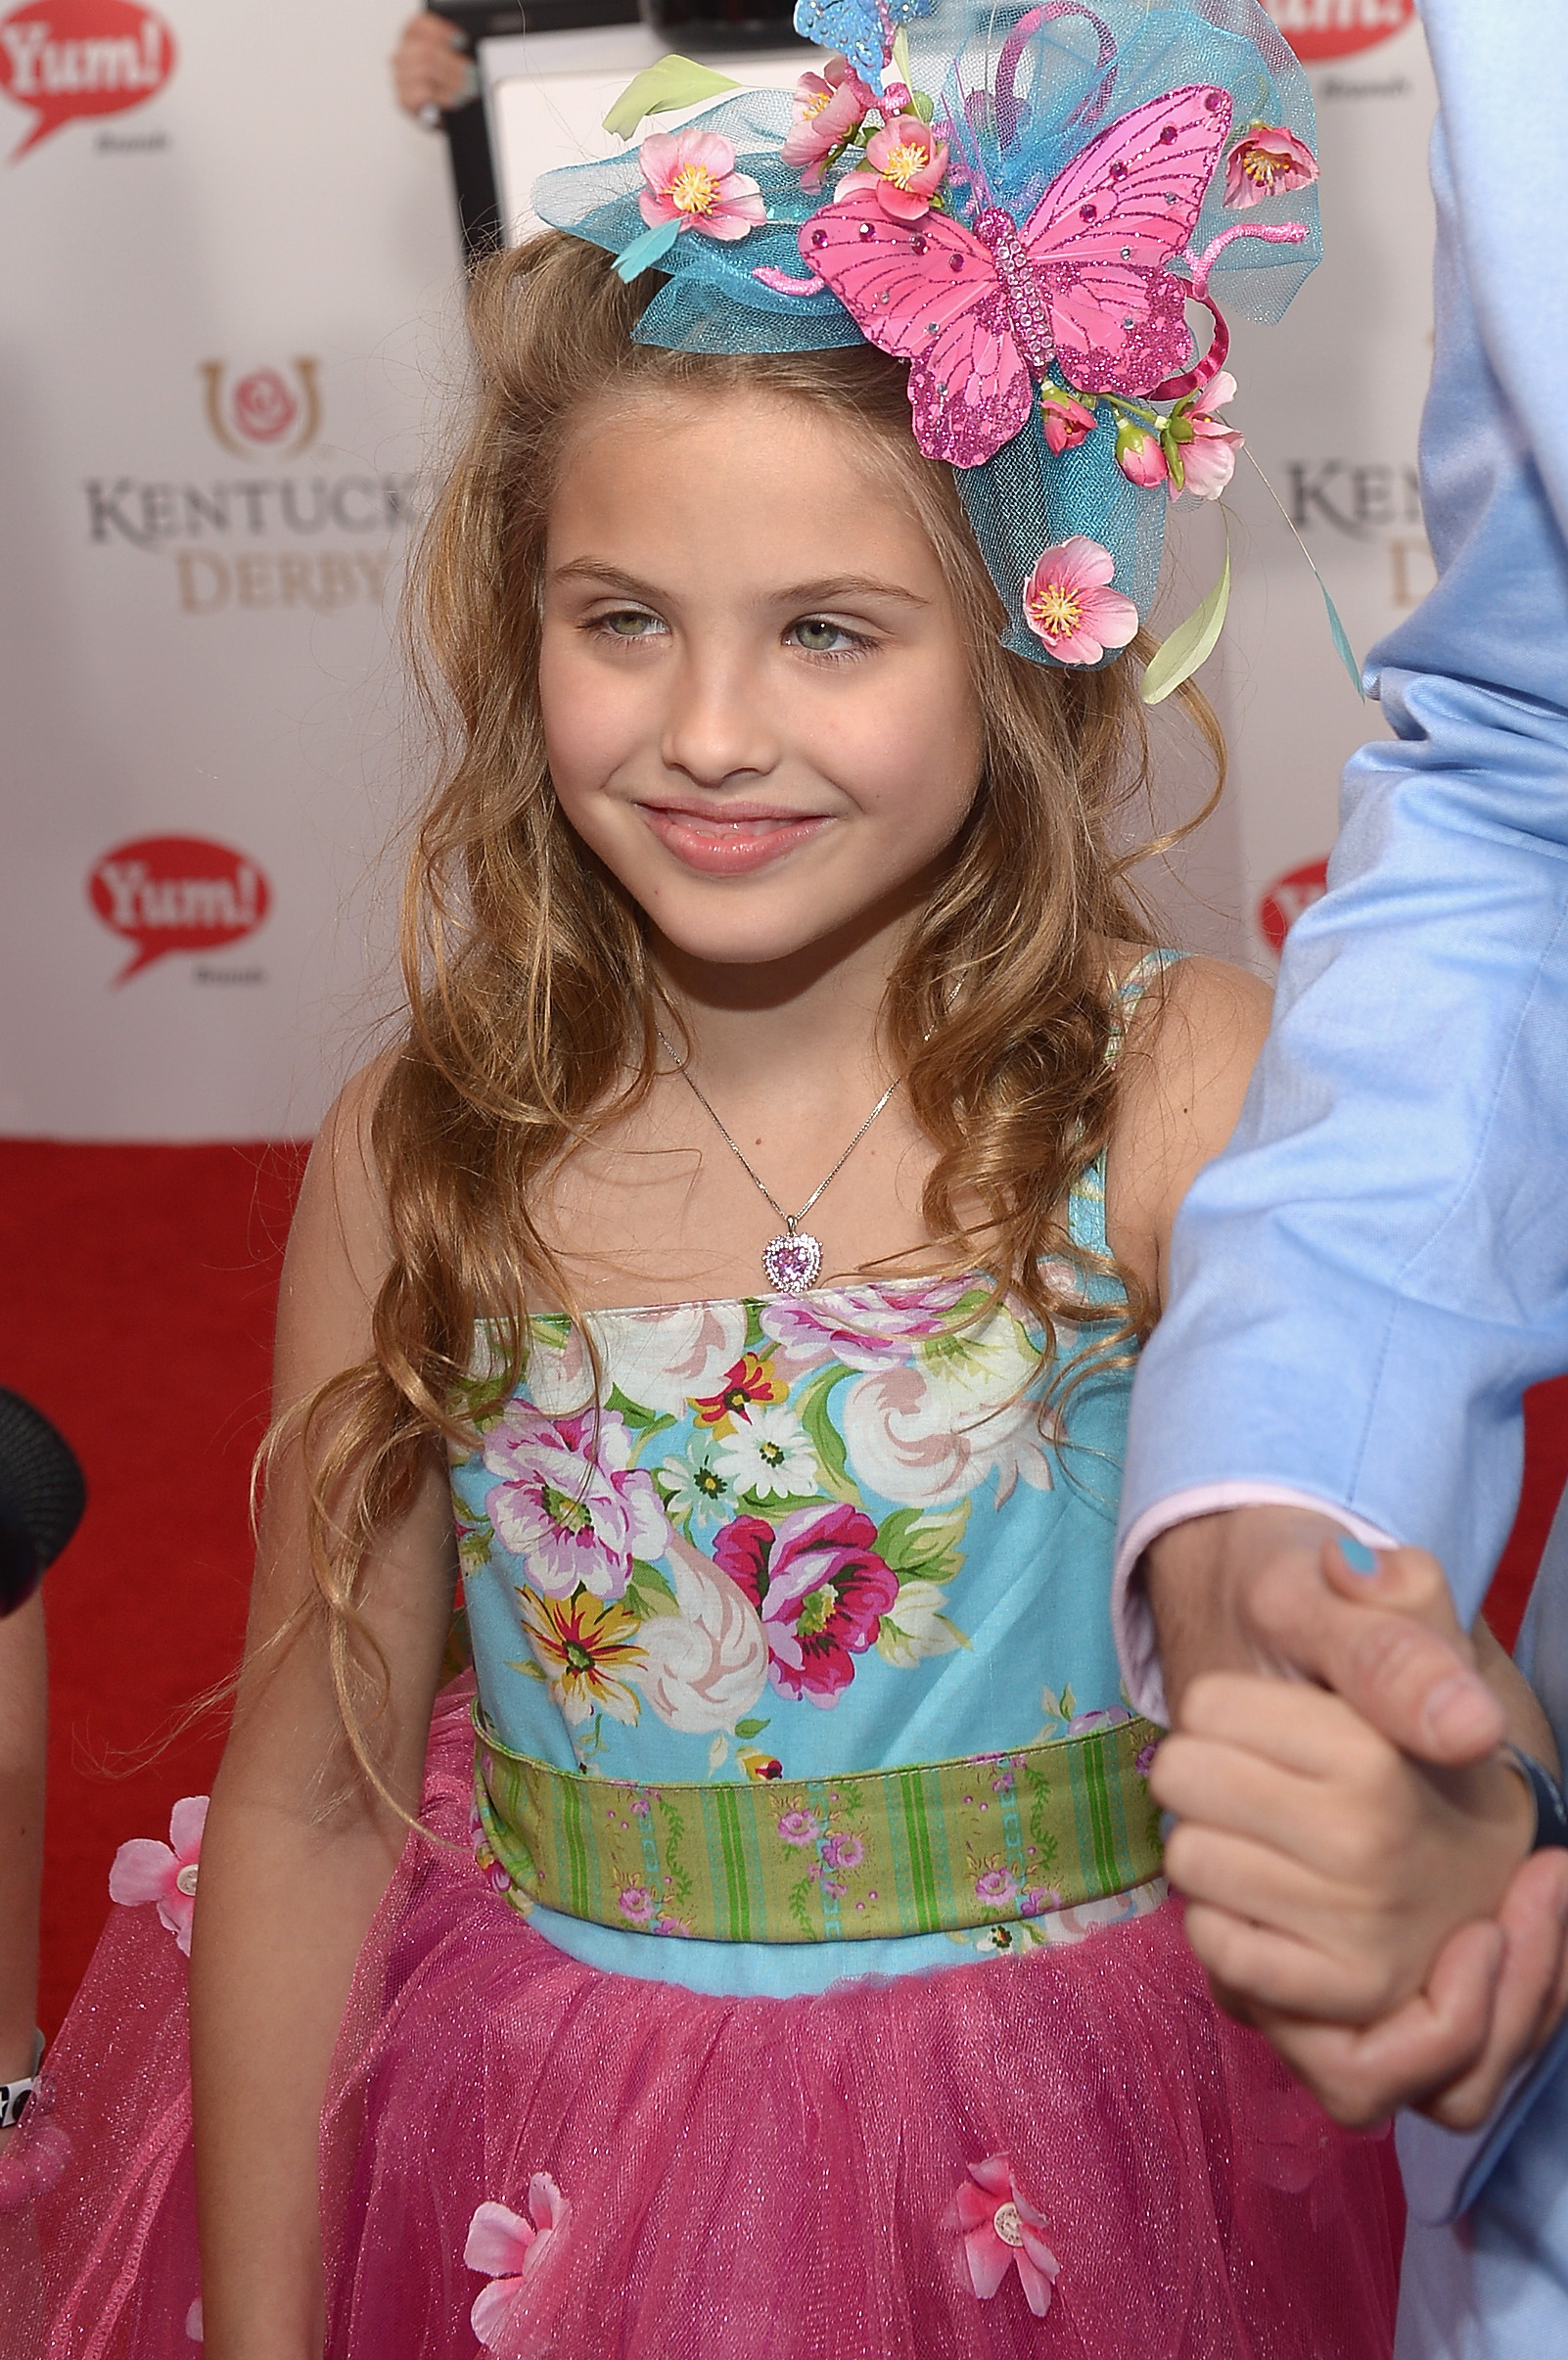 Dannielynn Birkhead attends the 140th Kentucky Derby on May 3, 2014 in Louisville, Kentucky | Source: Getty Images